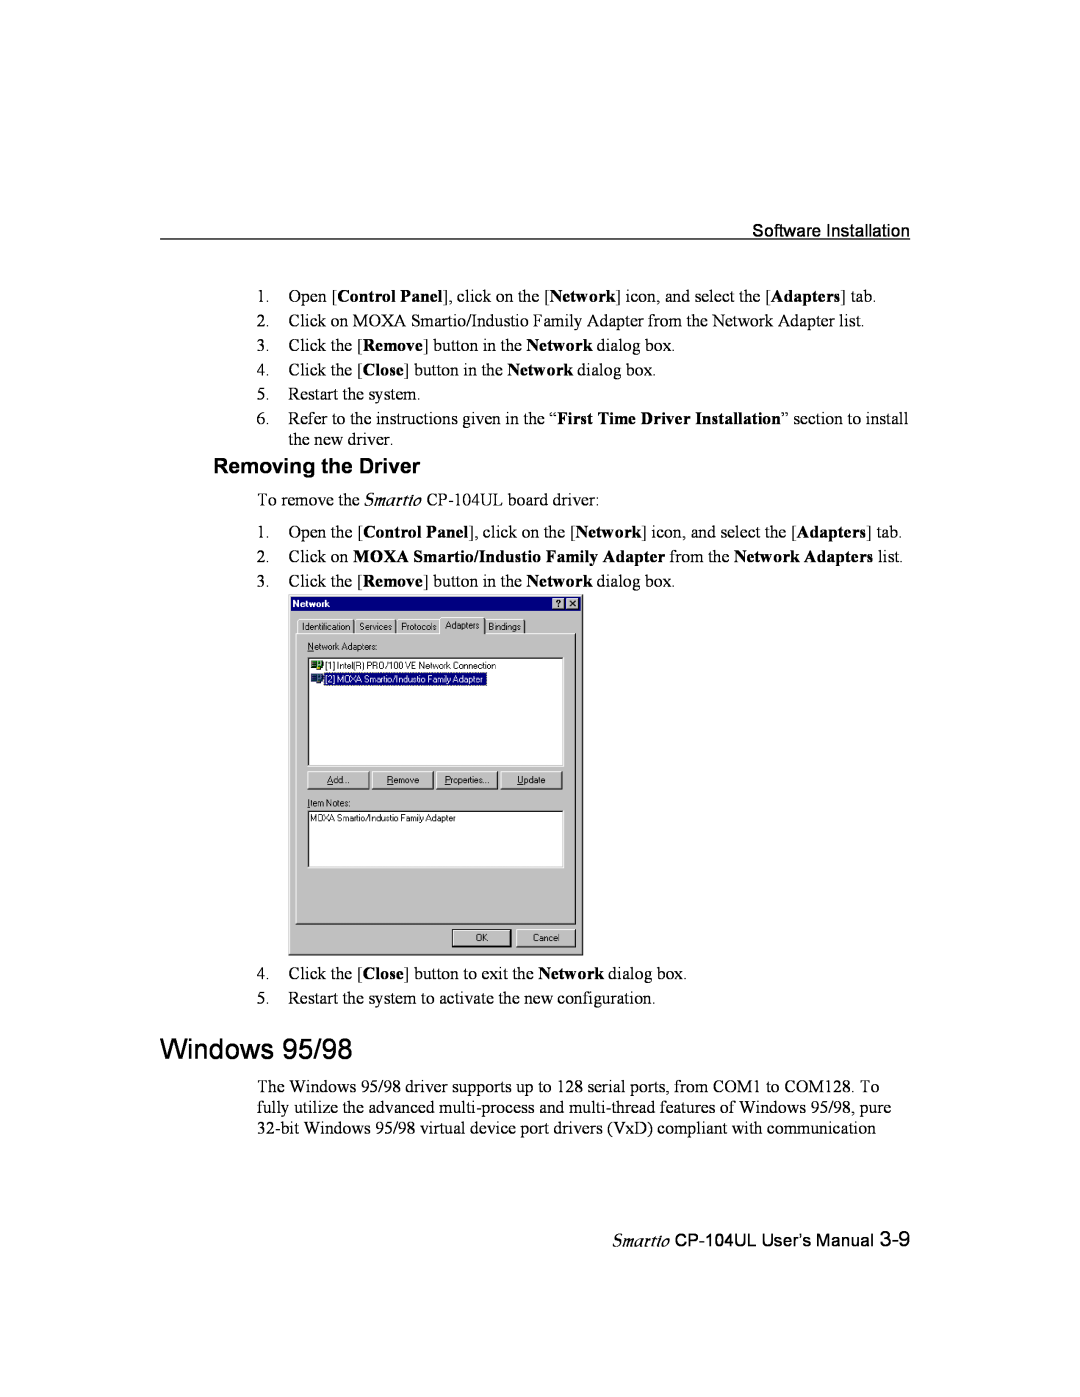 Moxa Technologies CP-104UL user manual Windows 95/98, Removing the Driver 